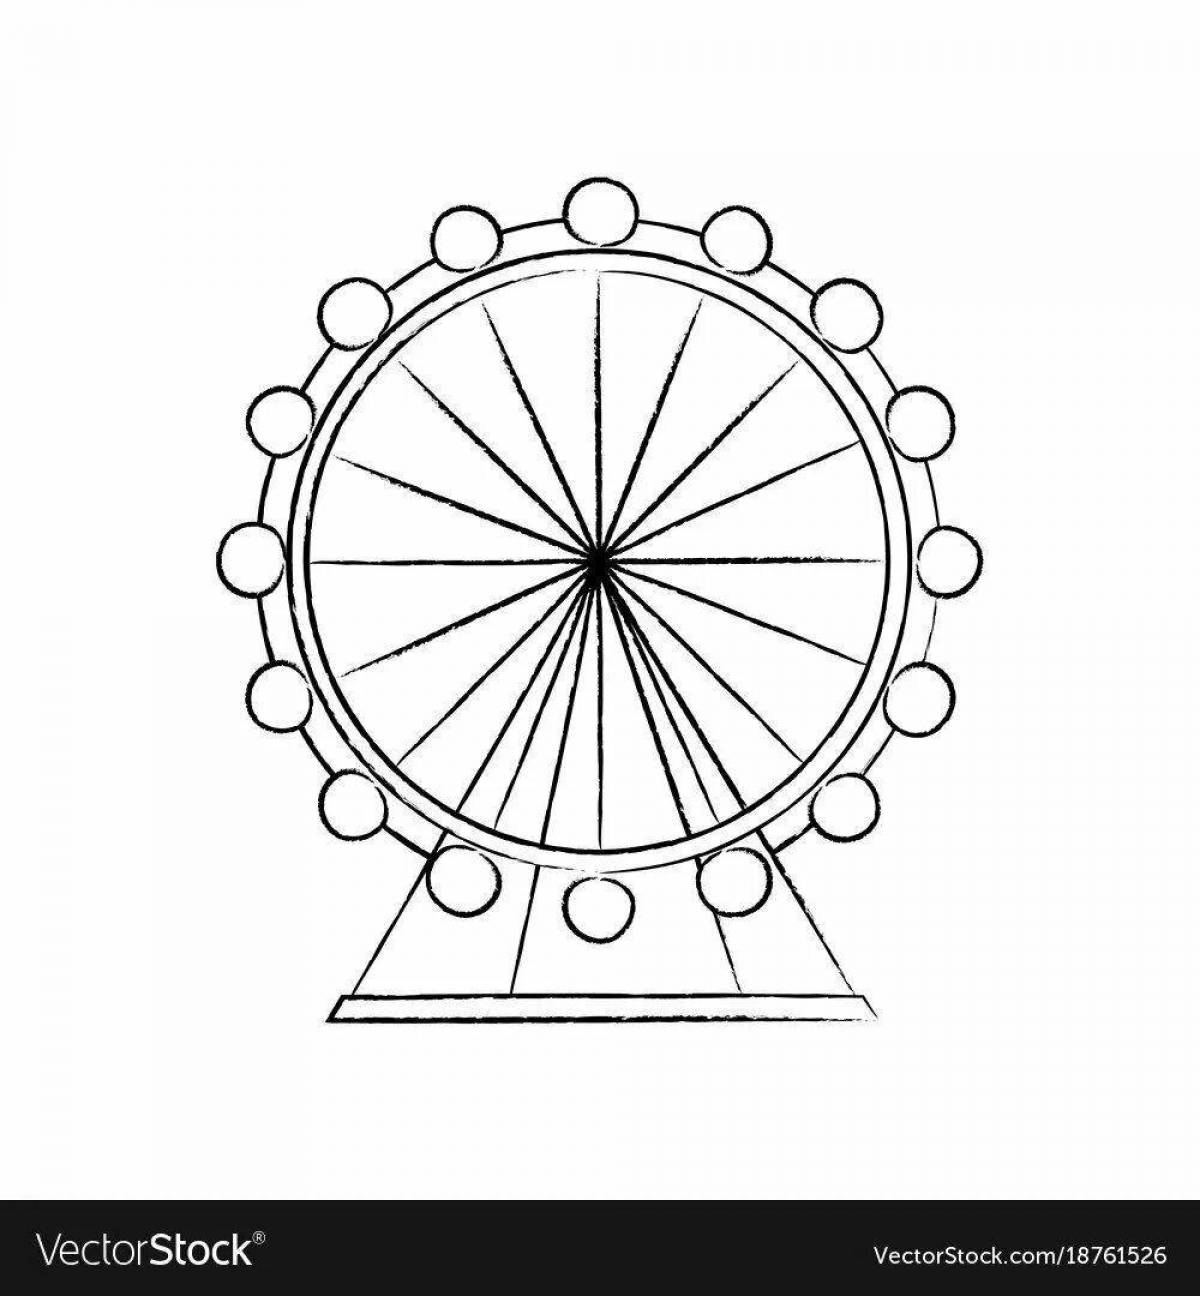 Great ferris wheel coloring pages for kids